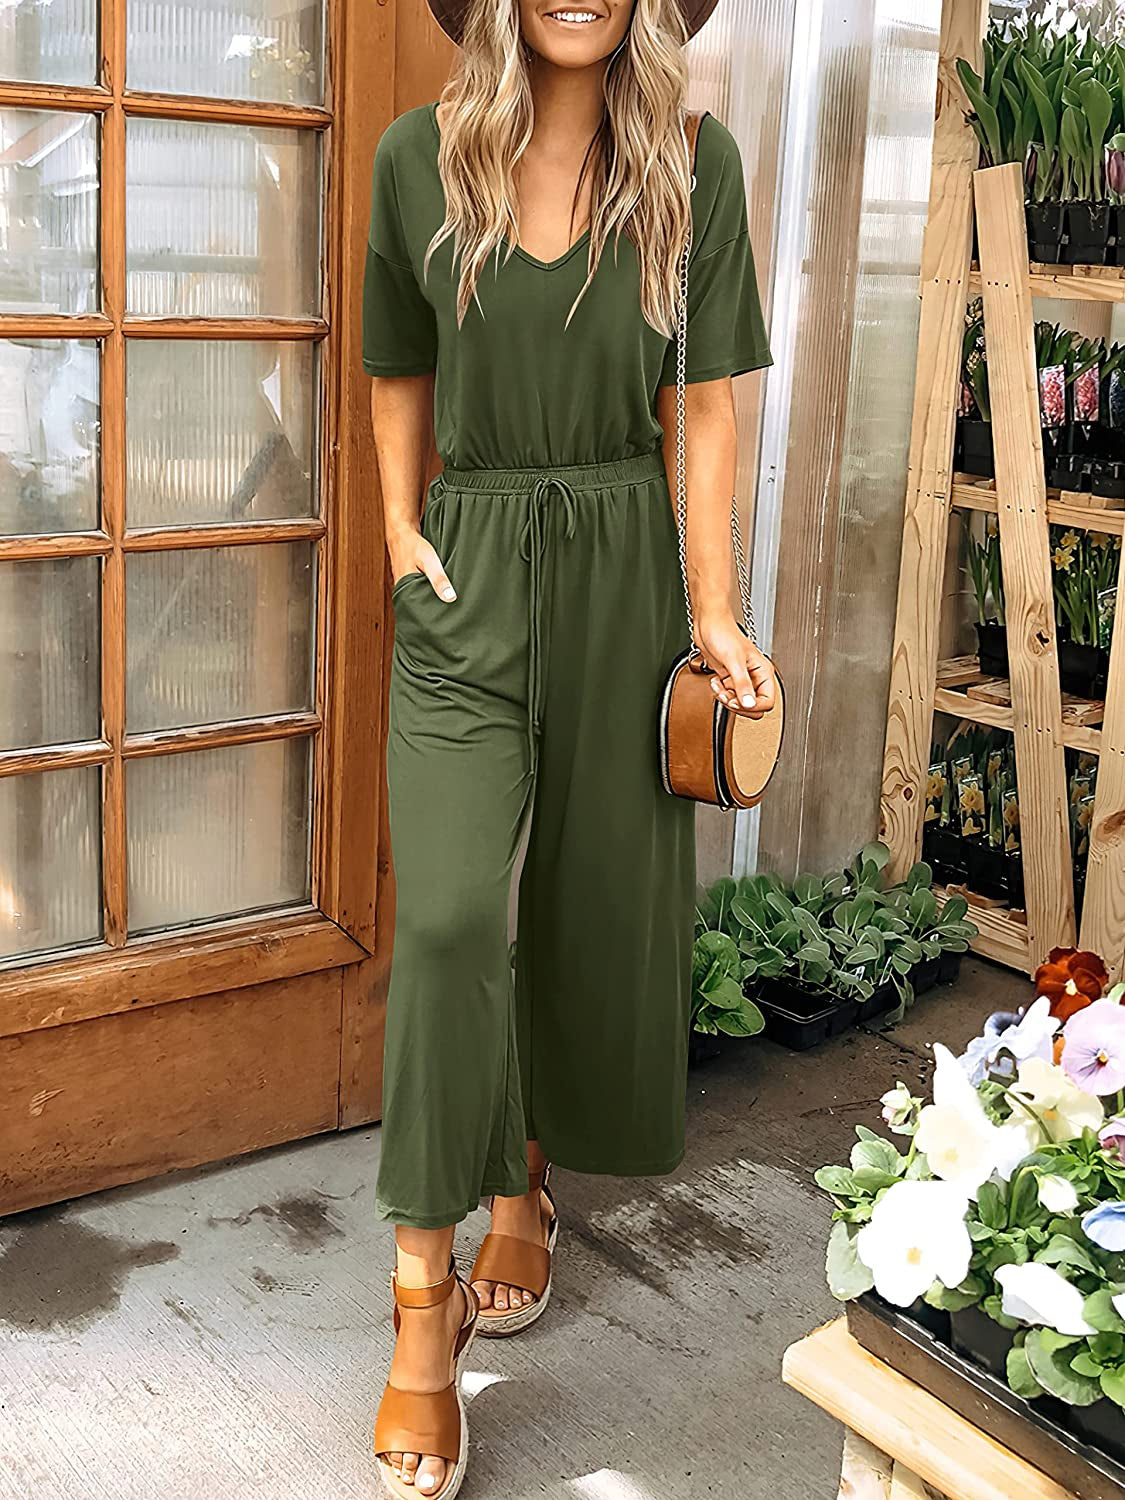 Womens Rompers Casual Summer Outfits Short Jumpsuits Solid Color Elastic  Waist Rompers with Pockets Women's Casual Sleeveless Printed Leg Jumpsuit